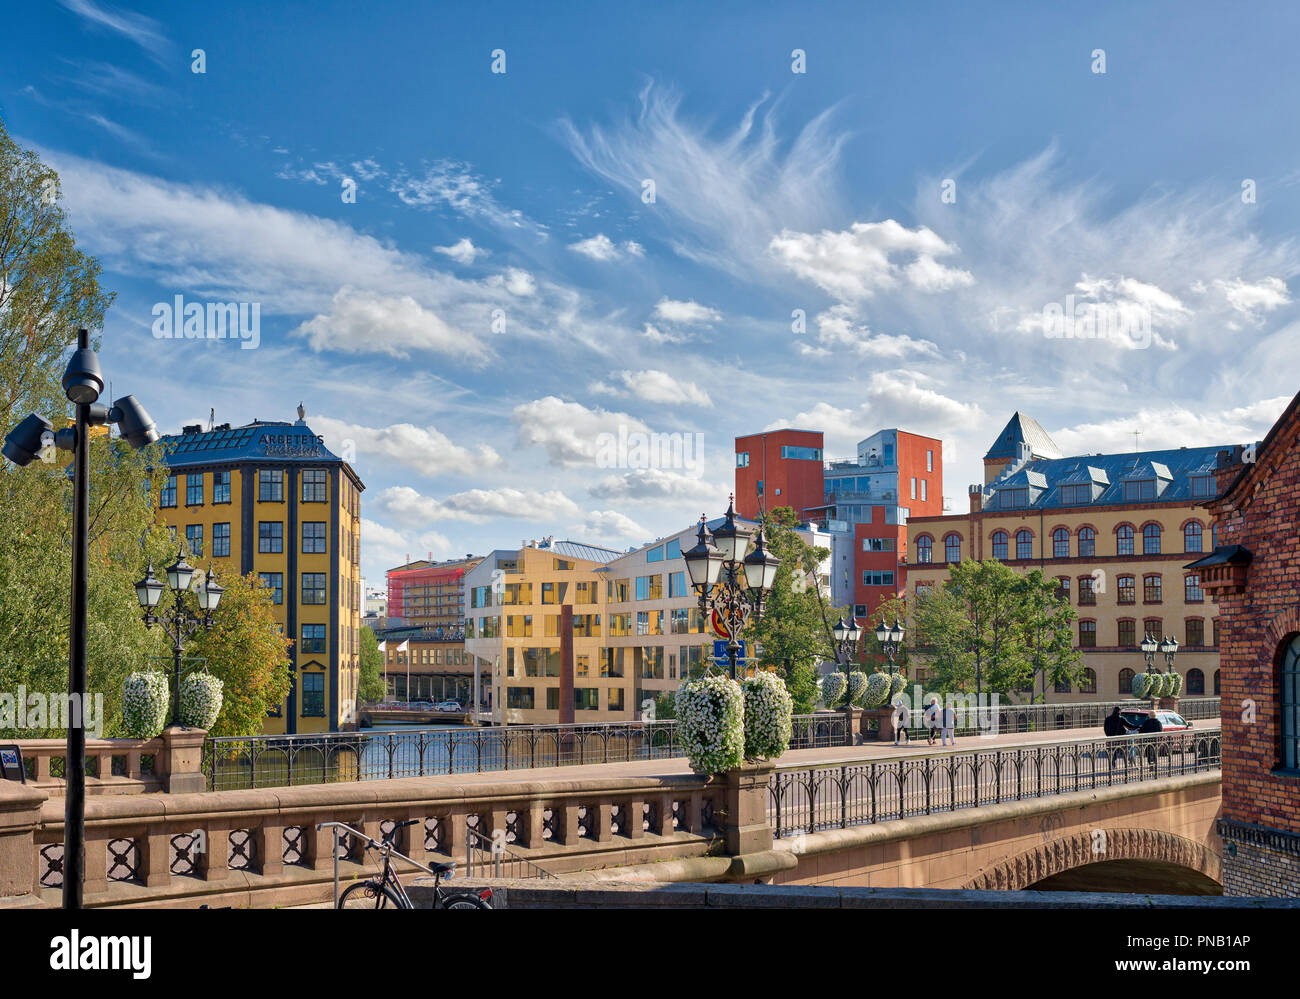 View of Norrkoping with Arbetets museum and city buildings Stock Photo